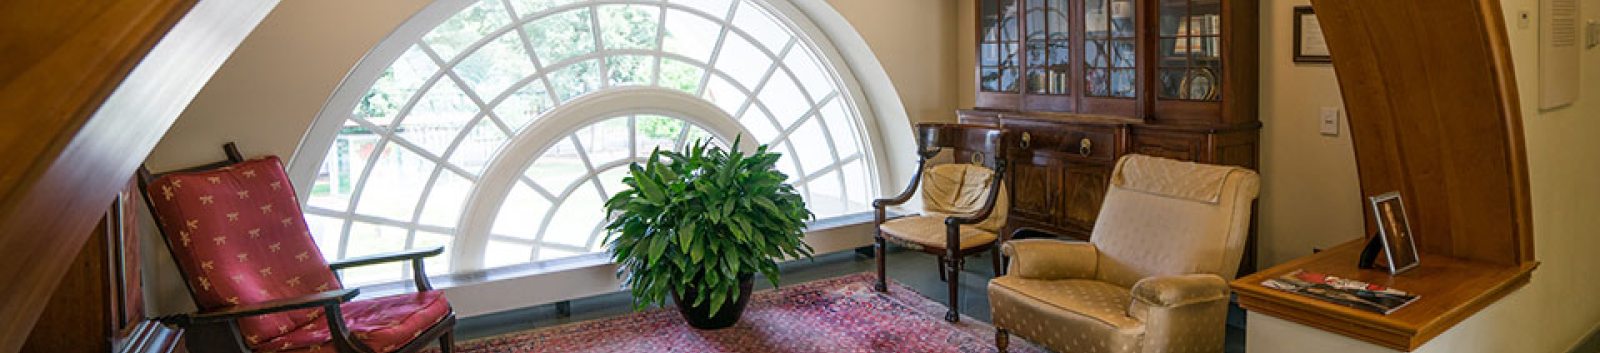 A small carpeted room with comfortable seating and a large arched window